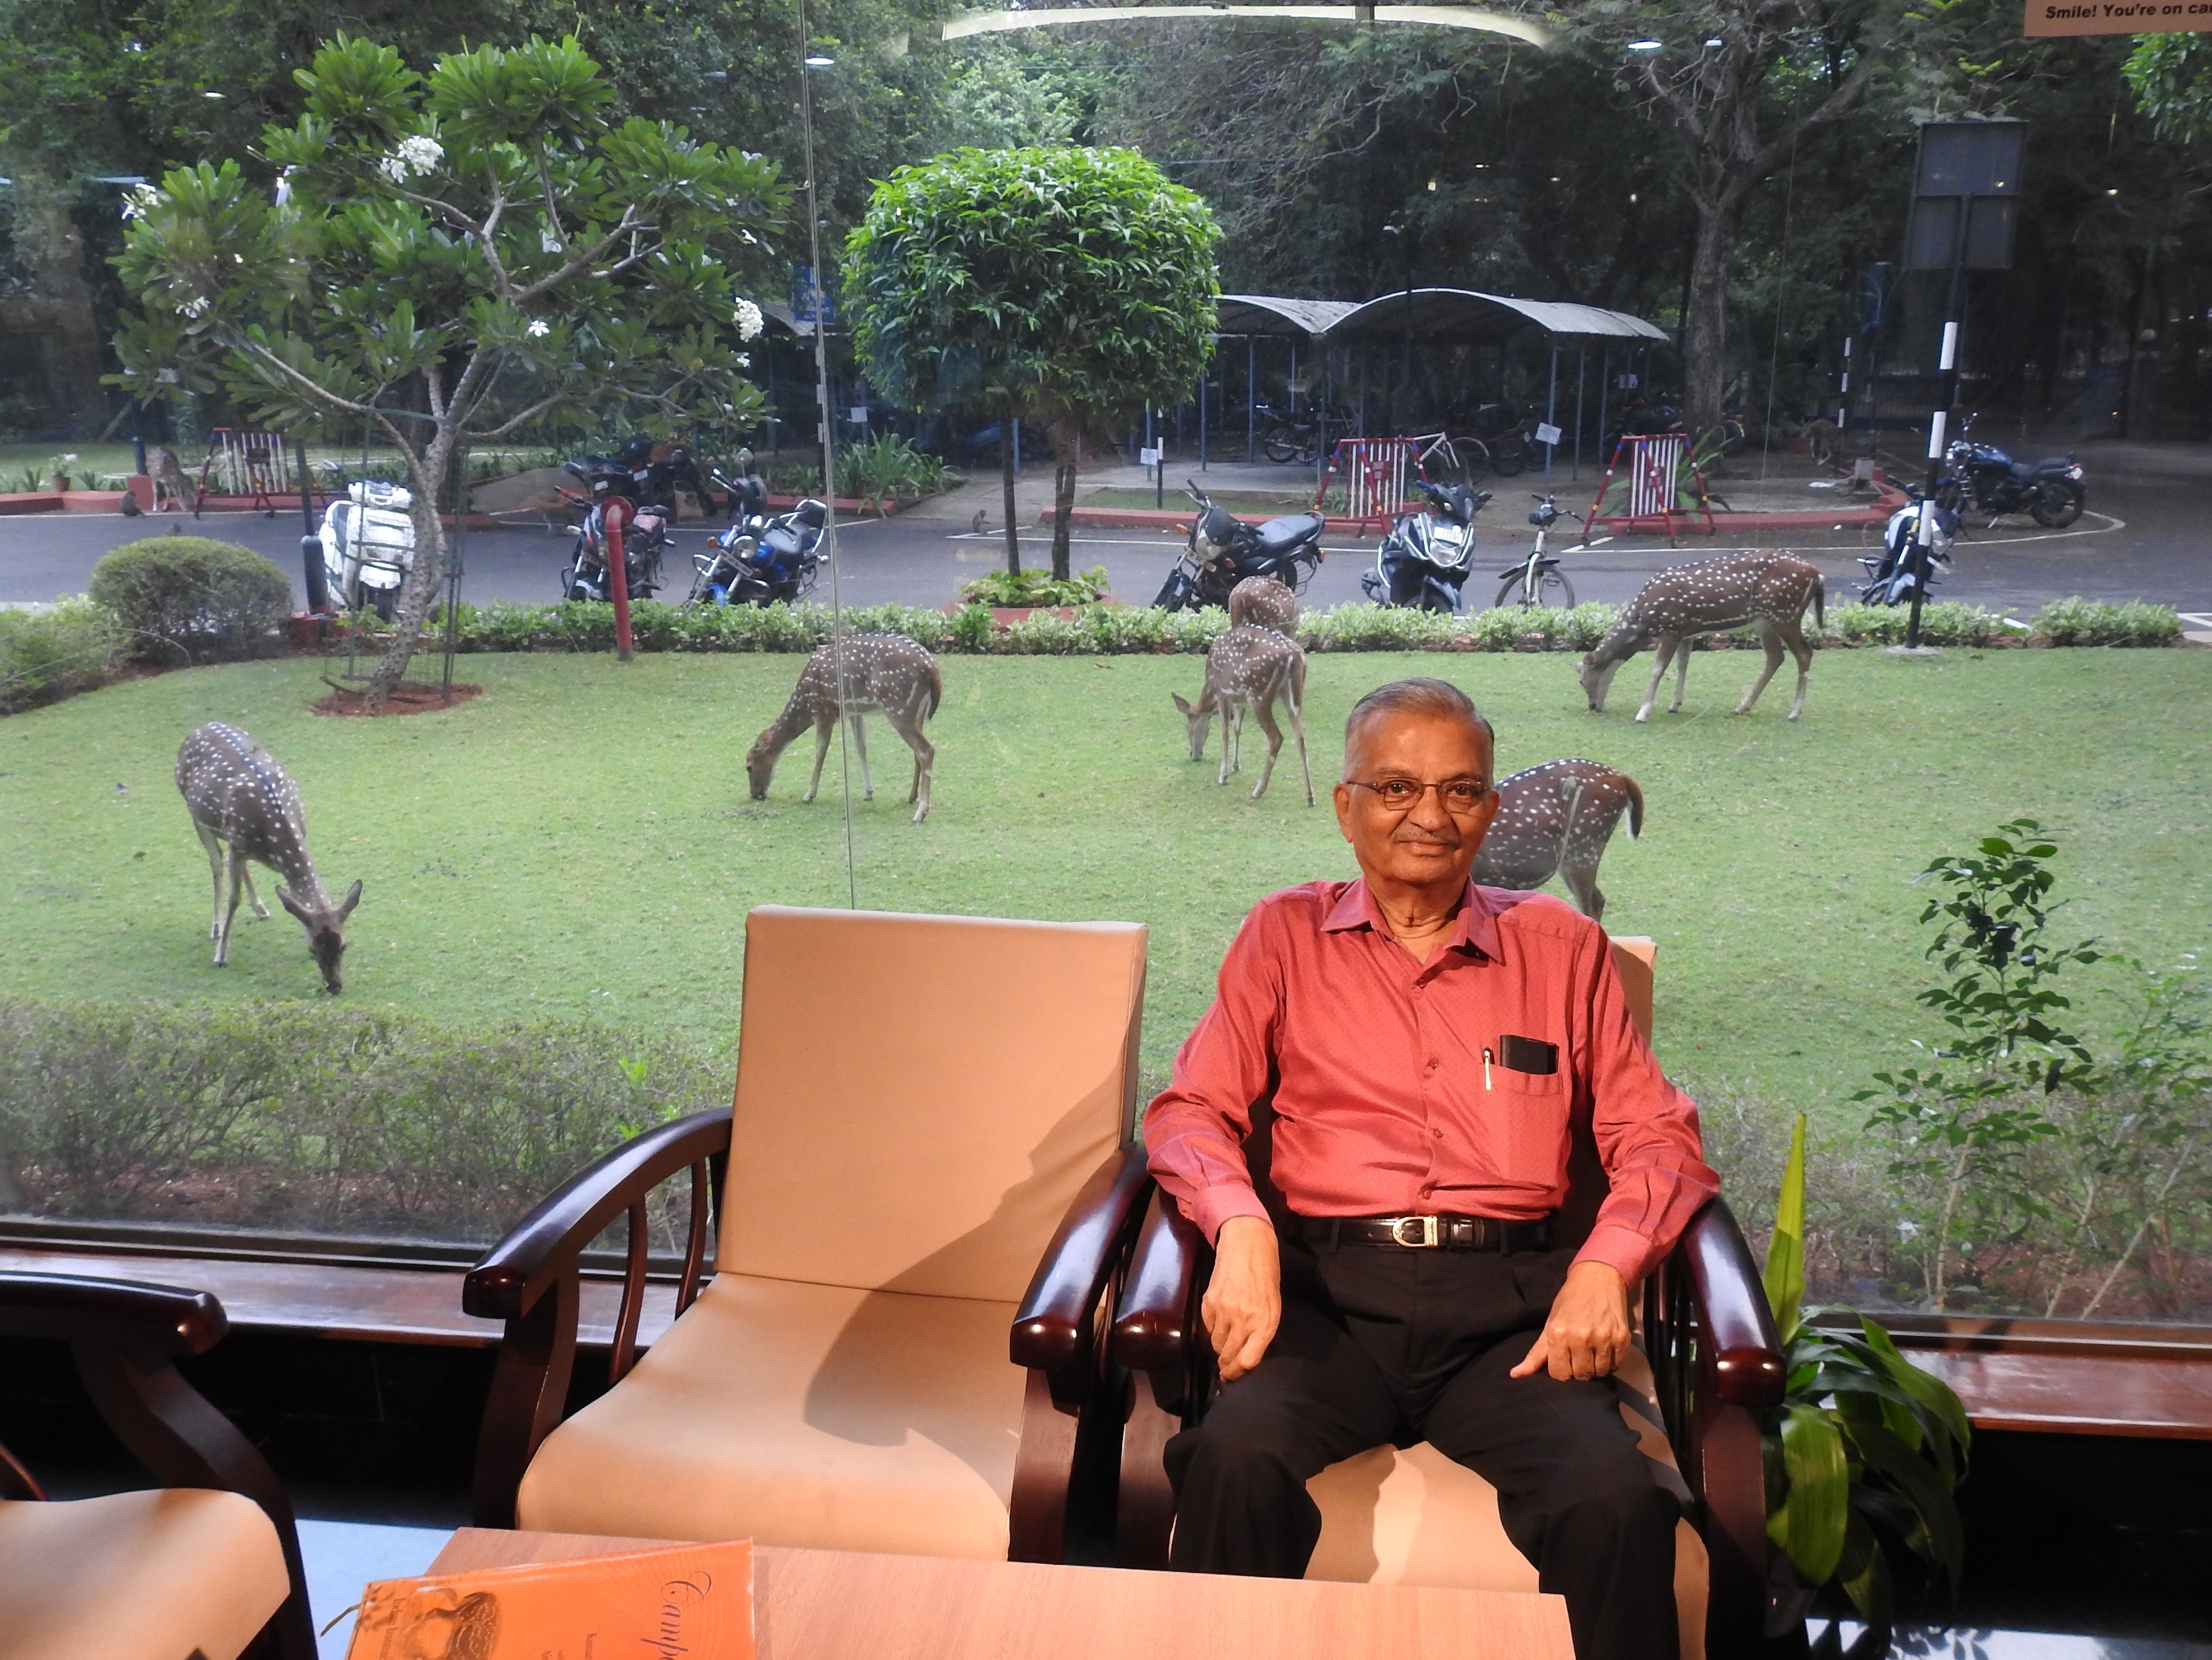 Dr. Anil Kakodkar at the Reading Area with spotted deer in the background 